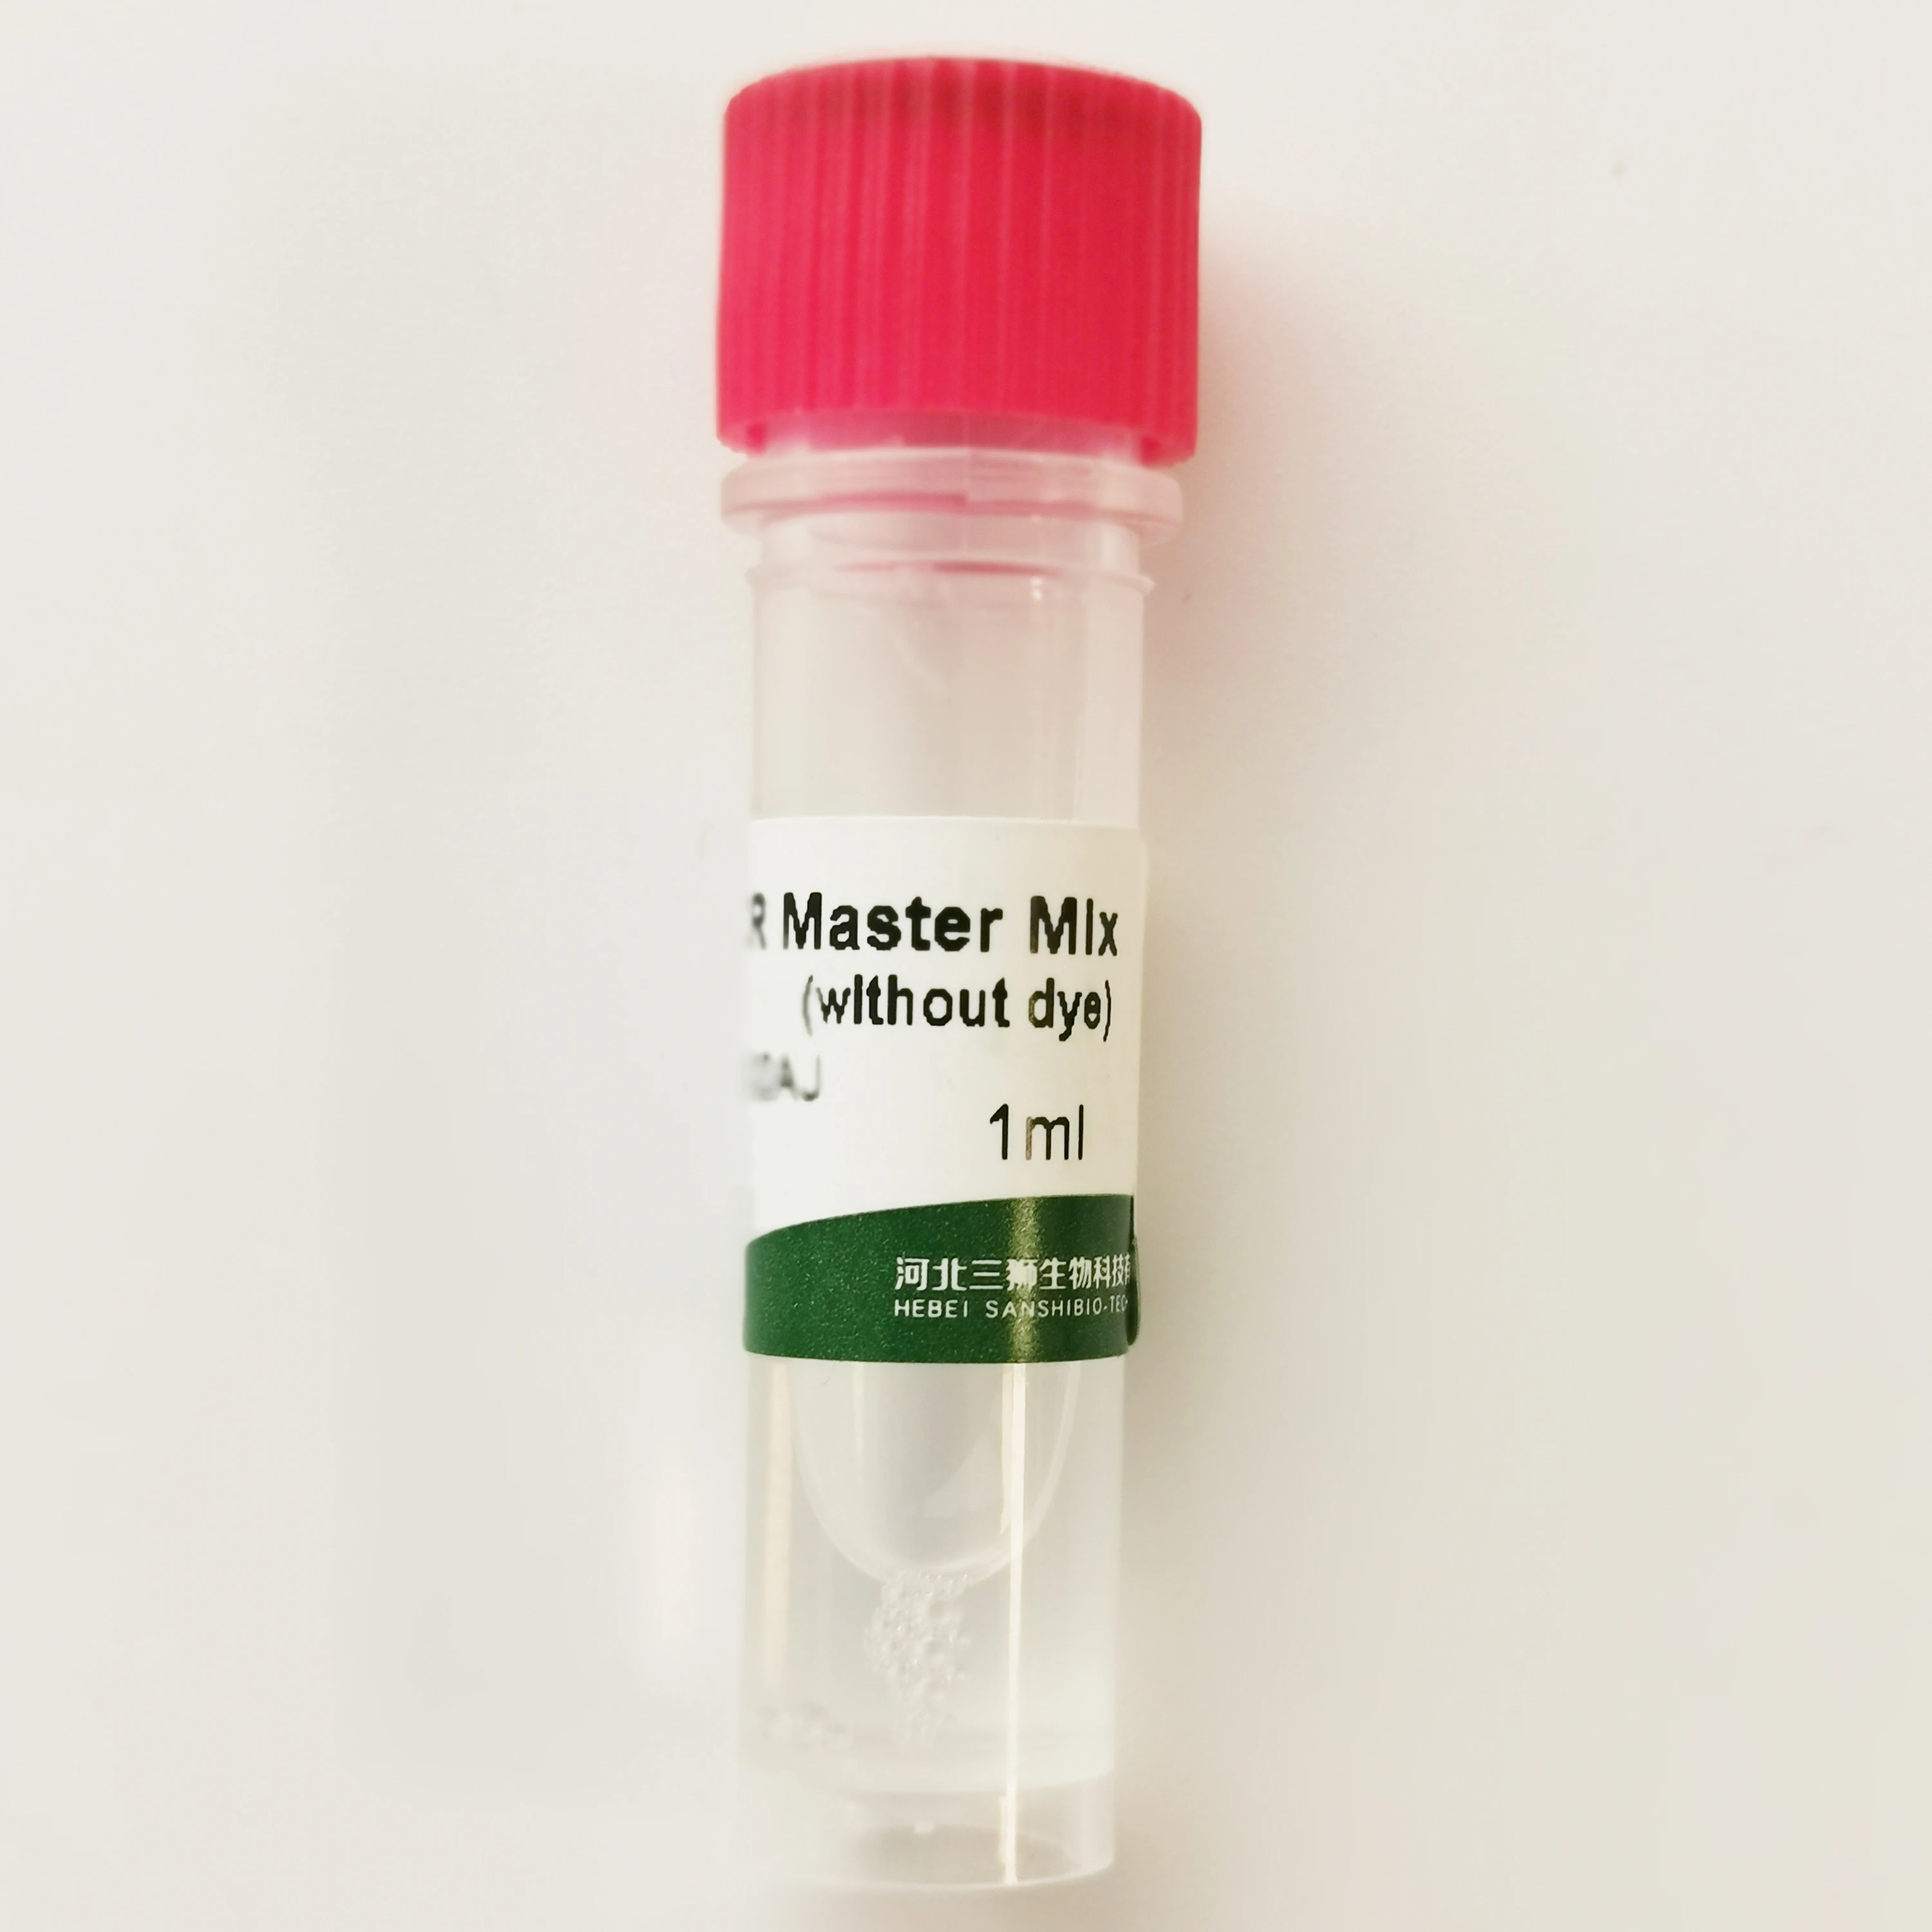 Hot selling good quality 2x taq pcr master mix (without dye) chemical reagents china